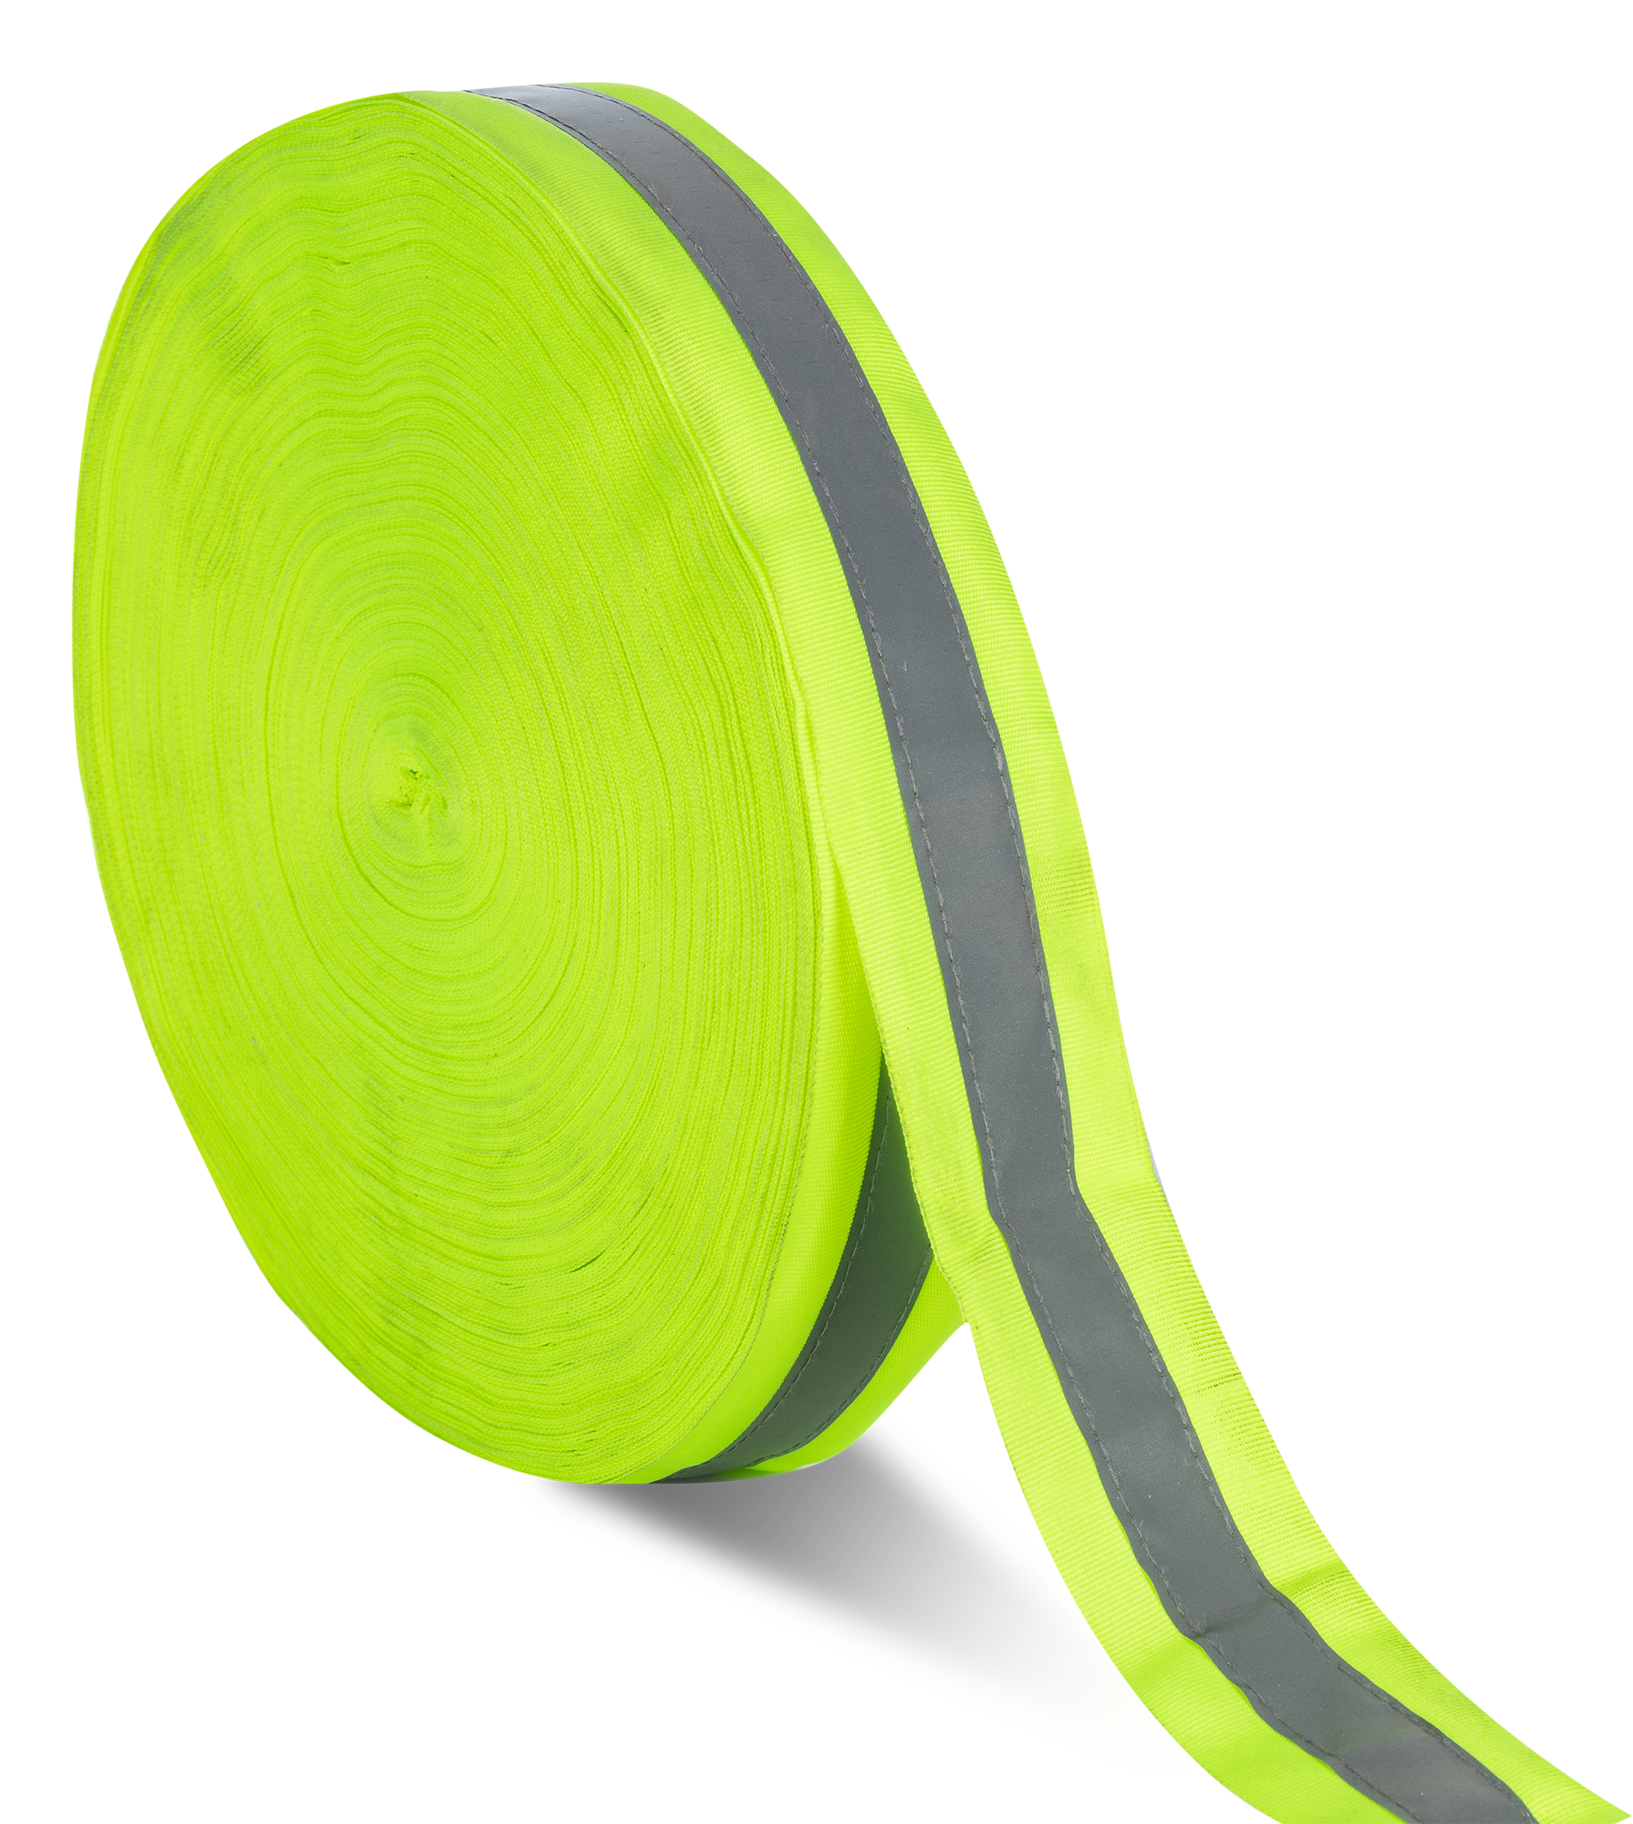 Reflective Tape 100m Roll - Lime